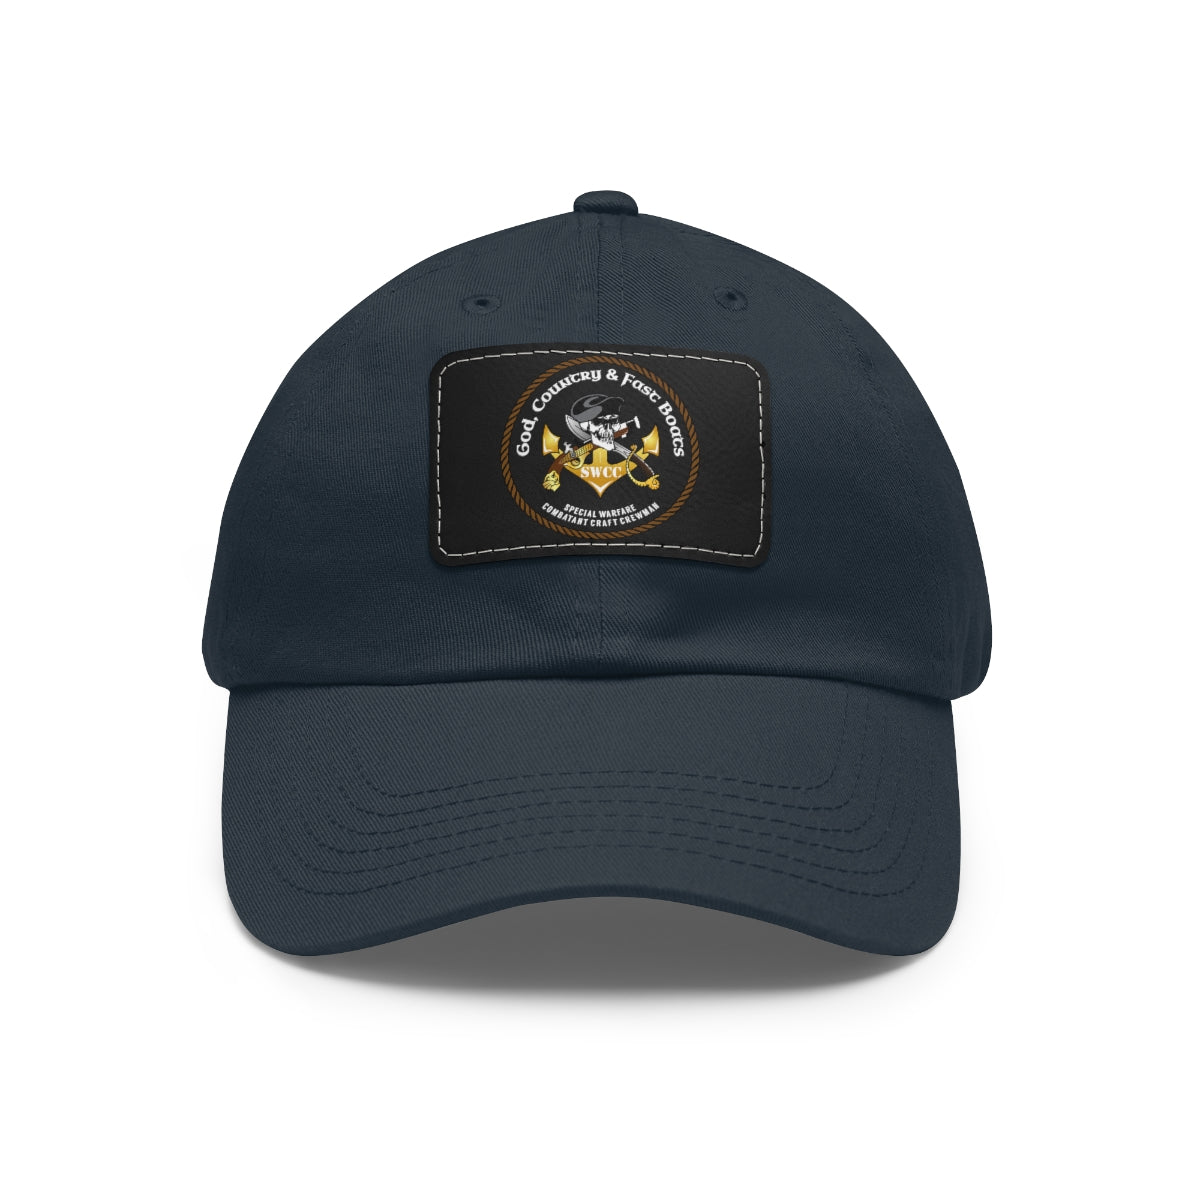 God Country and Fast Boats Hat with Leather Patch